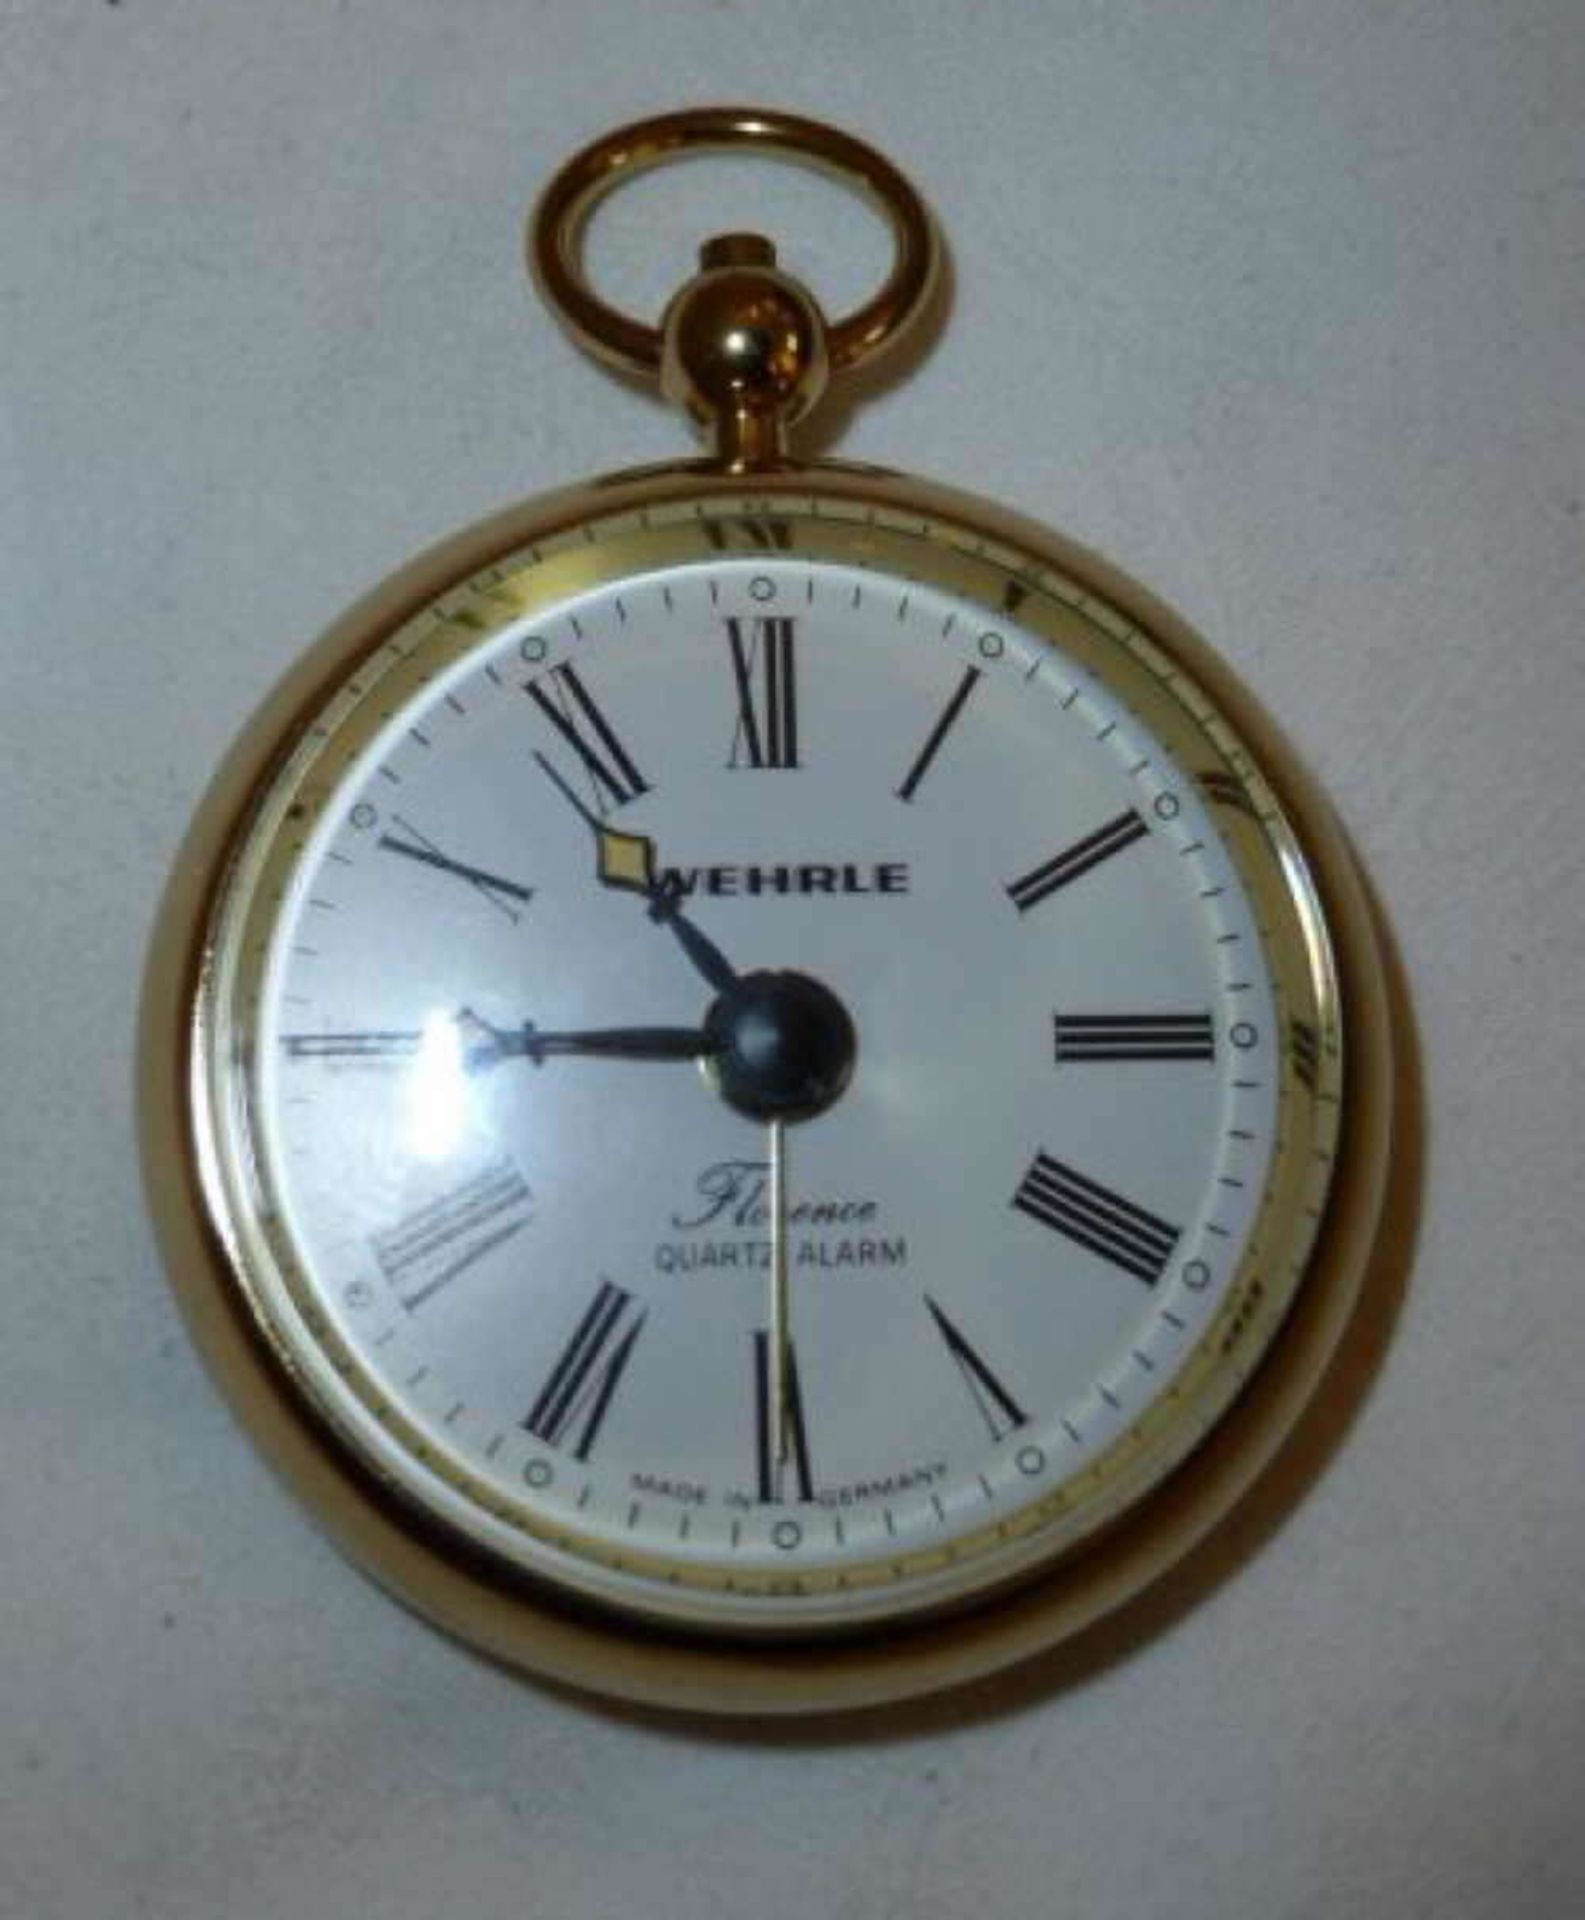 Wehrle Florence pocket watch, quartz alarm, brass. Clock with change function, 80s. New condition.